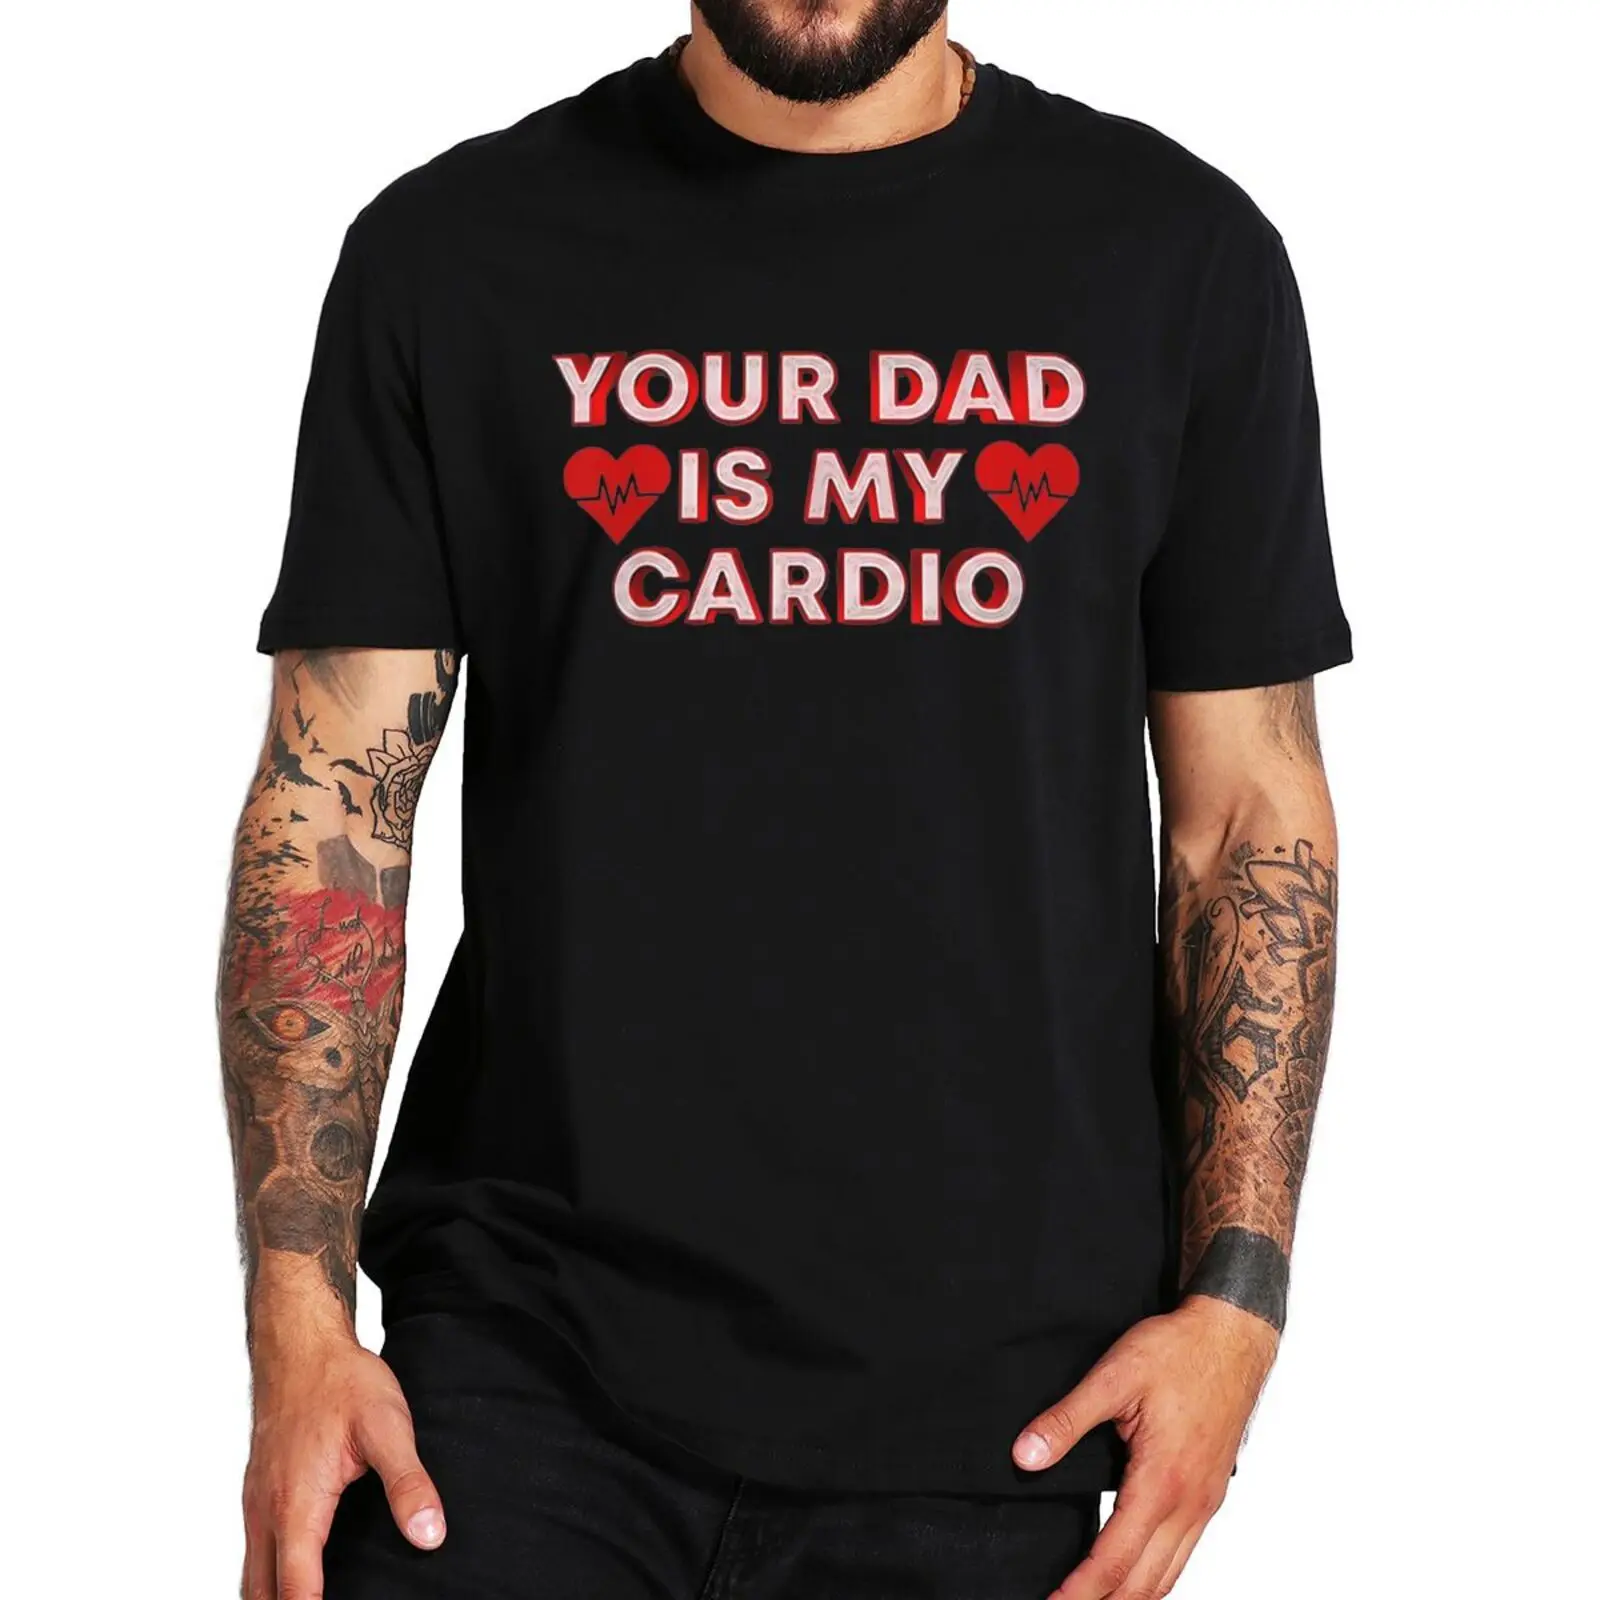 

Your Dad Is My Cardio T Shirt Funny Quote Memes Jokes Humor Men Women Clothing Summer EU Size 100% Cotton Casual T-shirts